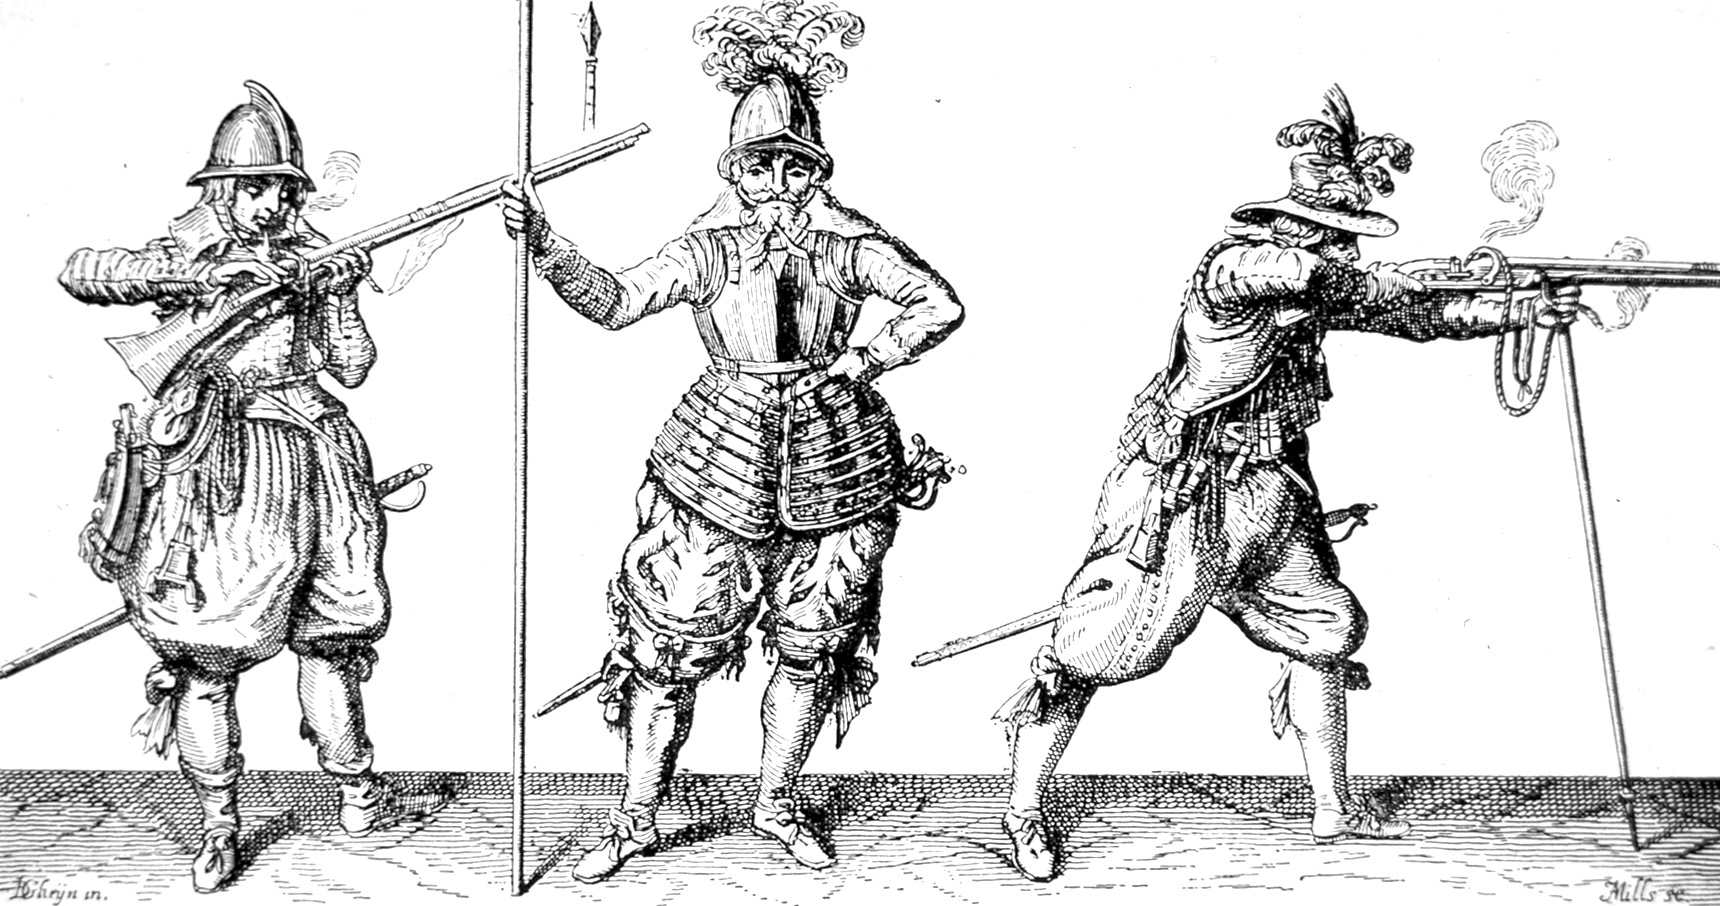 Infantry at Breitenfeld used both pikes and firearms. The light arquebus (left) was relatively inaccurate, while the heavier musket (right) was accurate, but required a forkrest for firing.